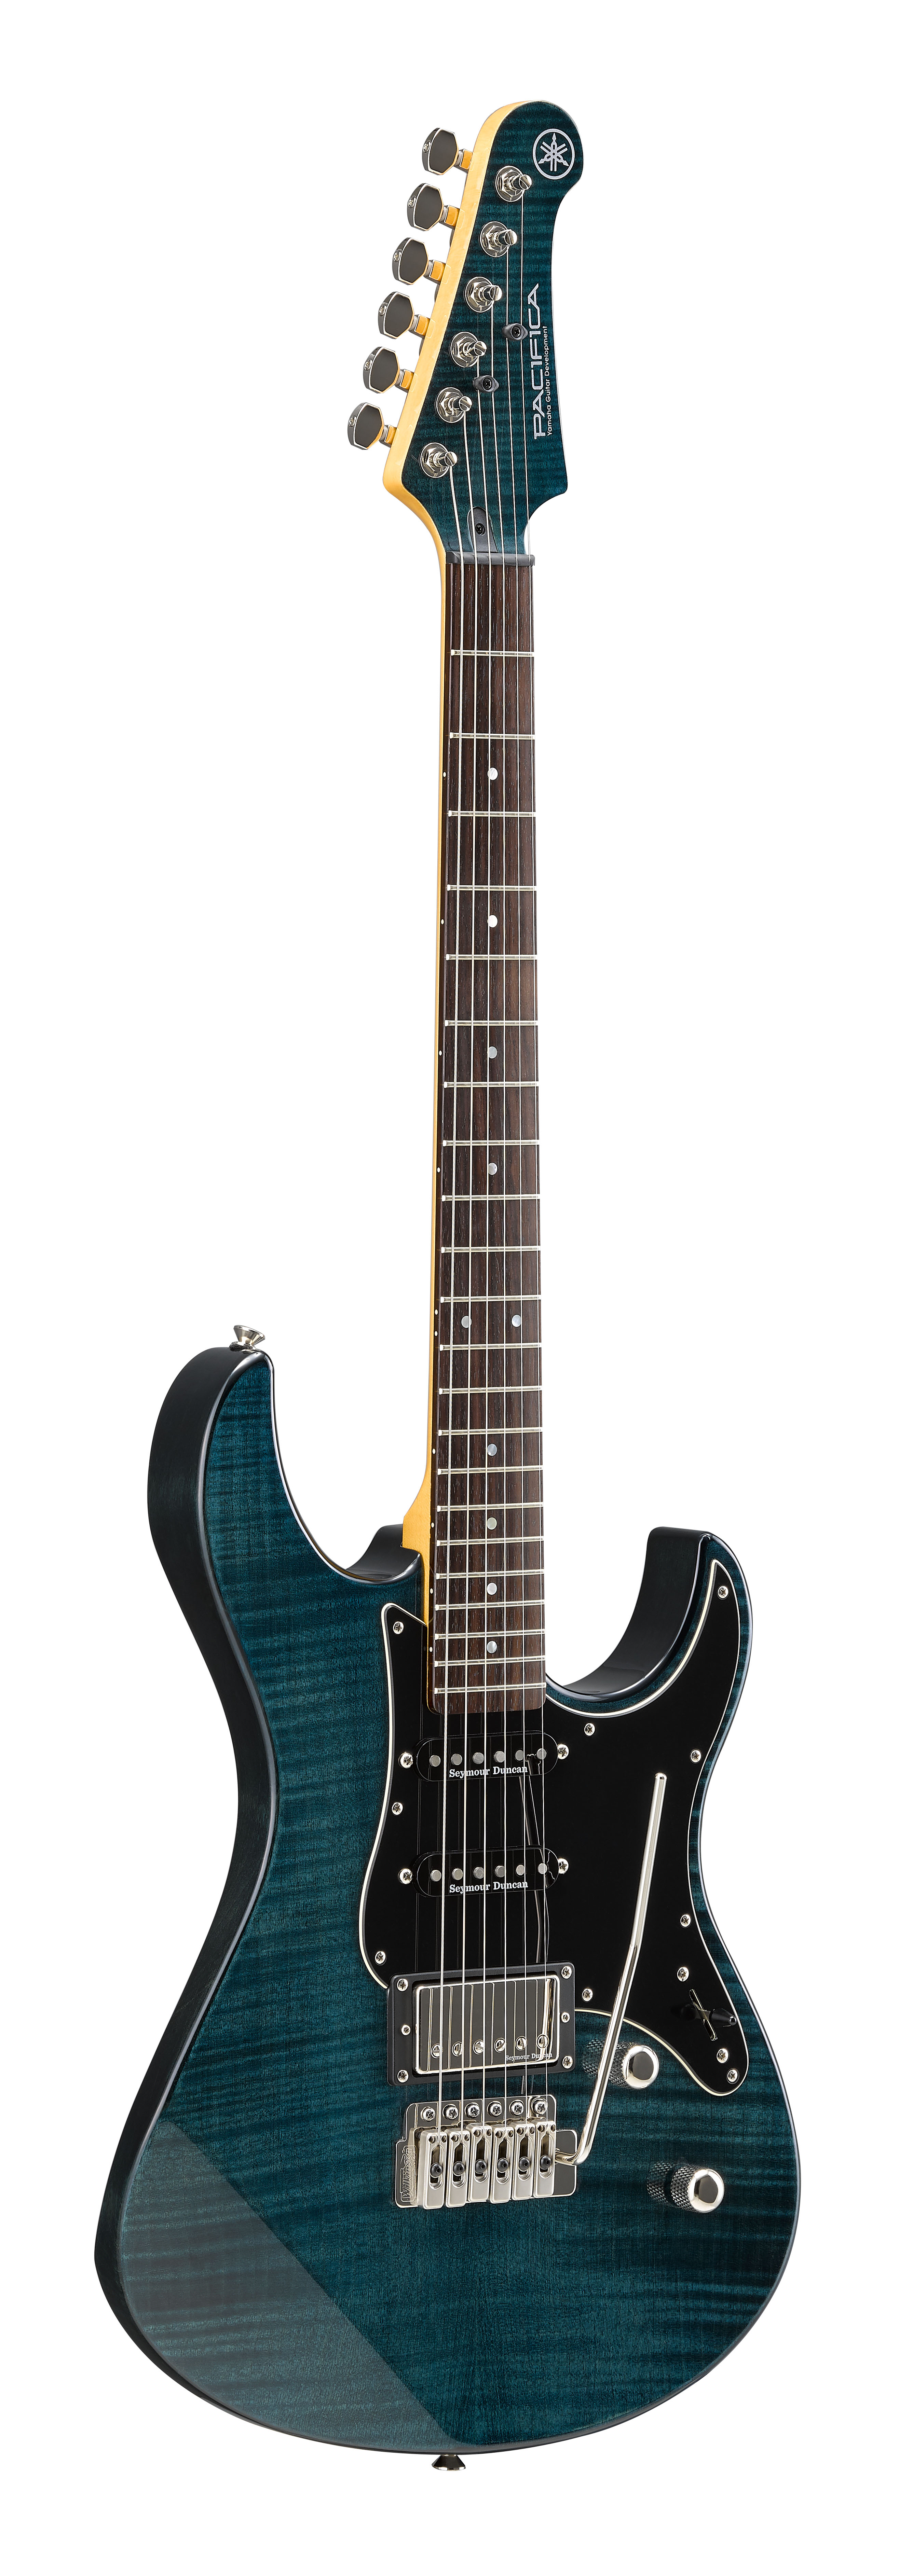 yamaha-debuts-limited-run-of-pacifica-electric-guitars-with-bold-range